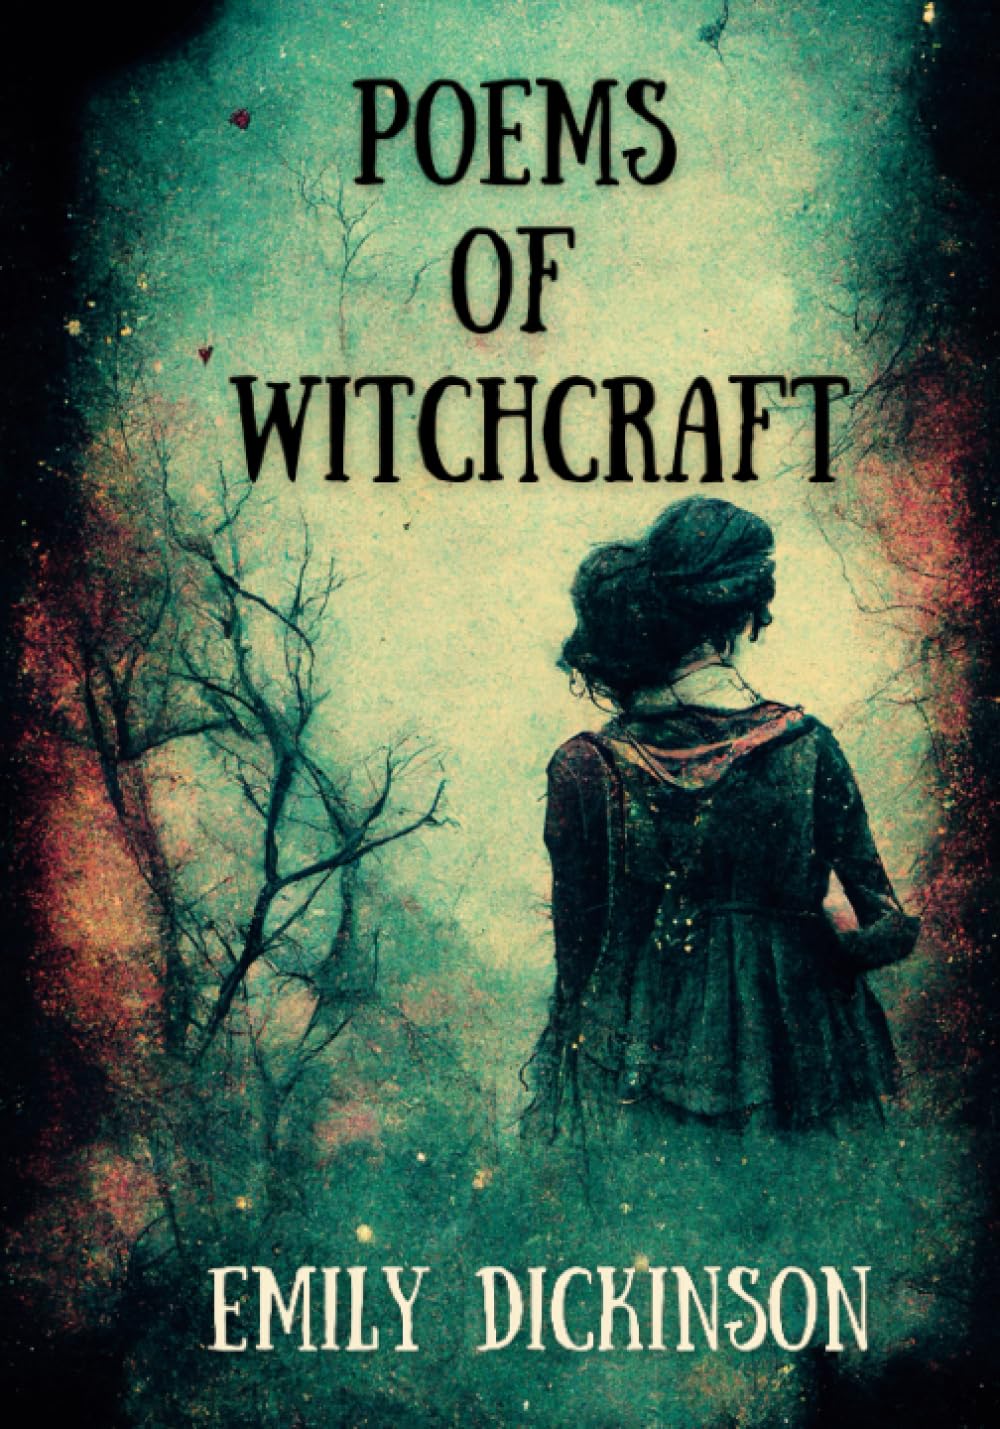 Poems of Witchcraft